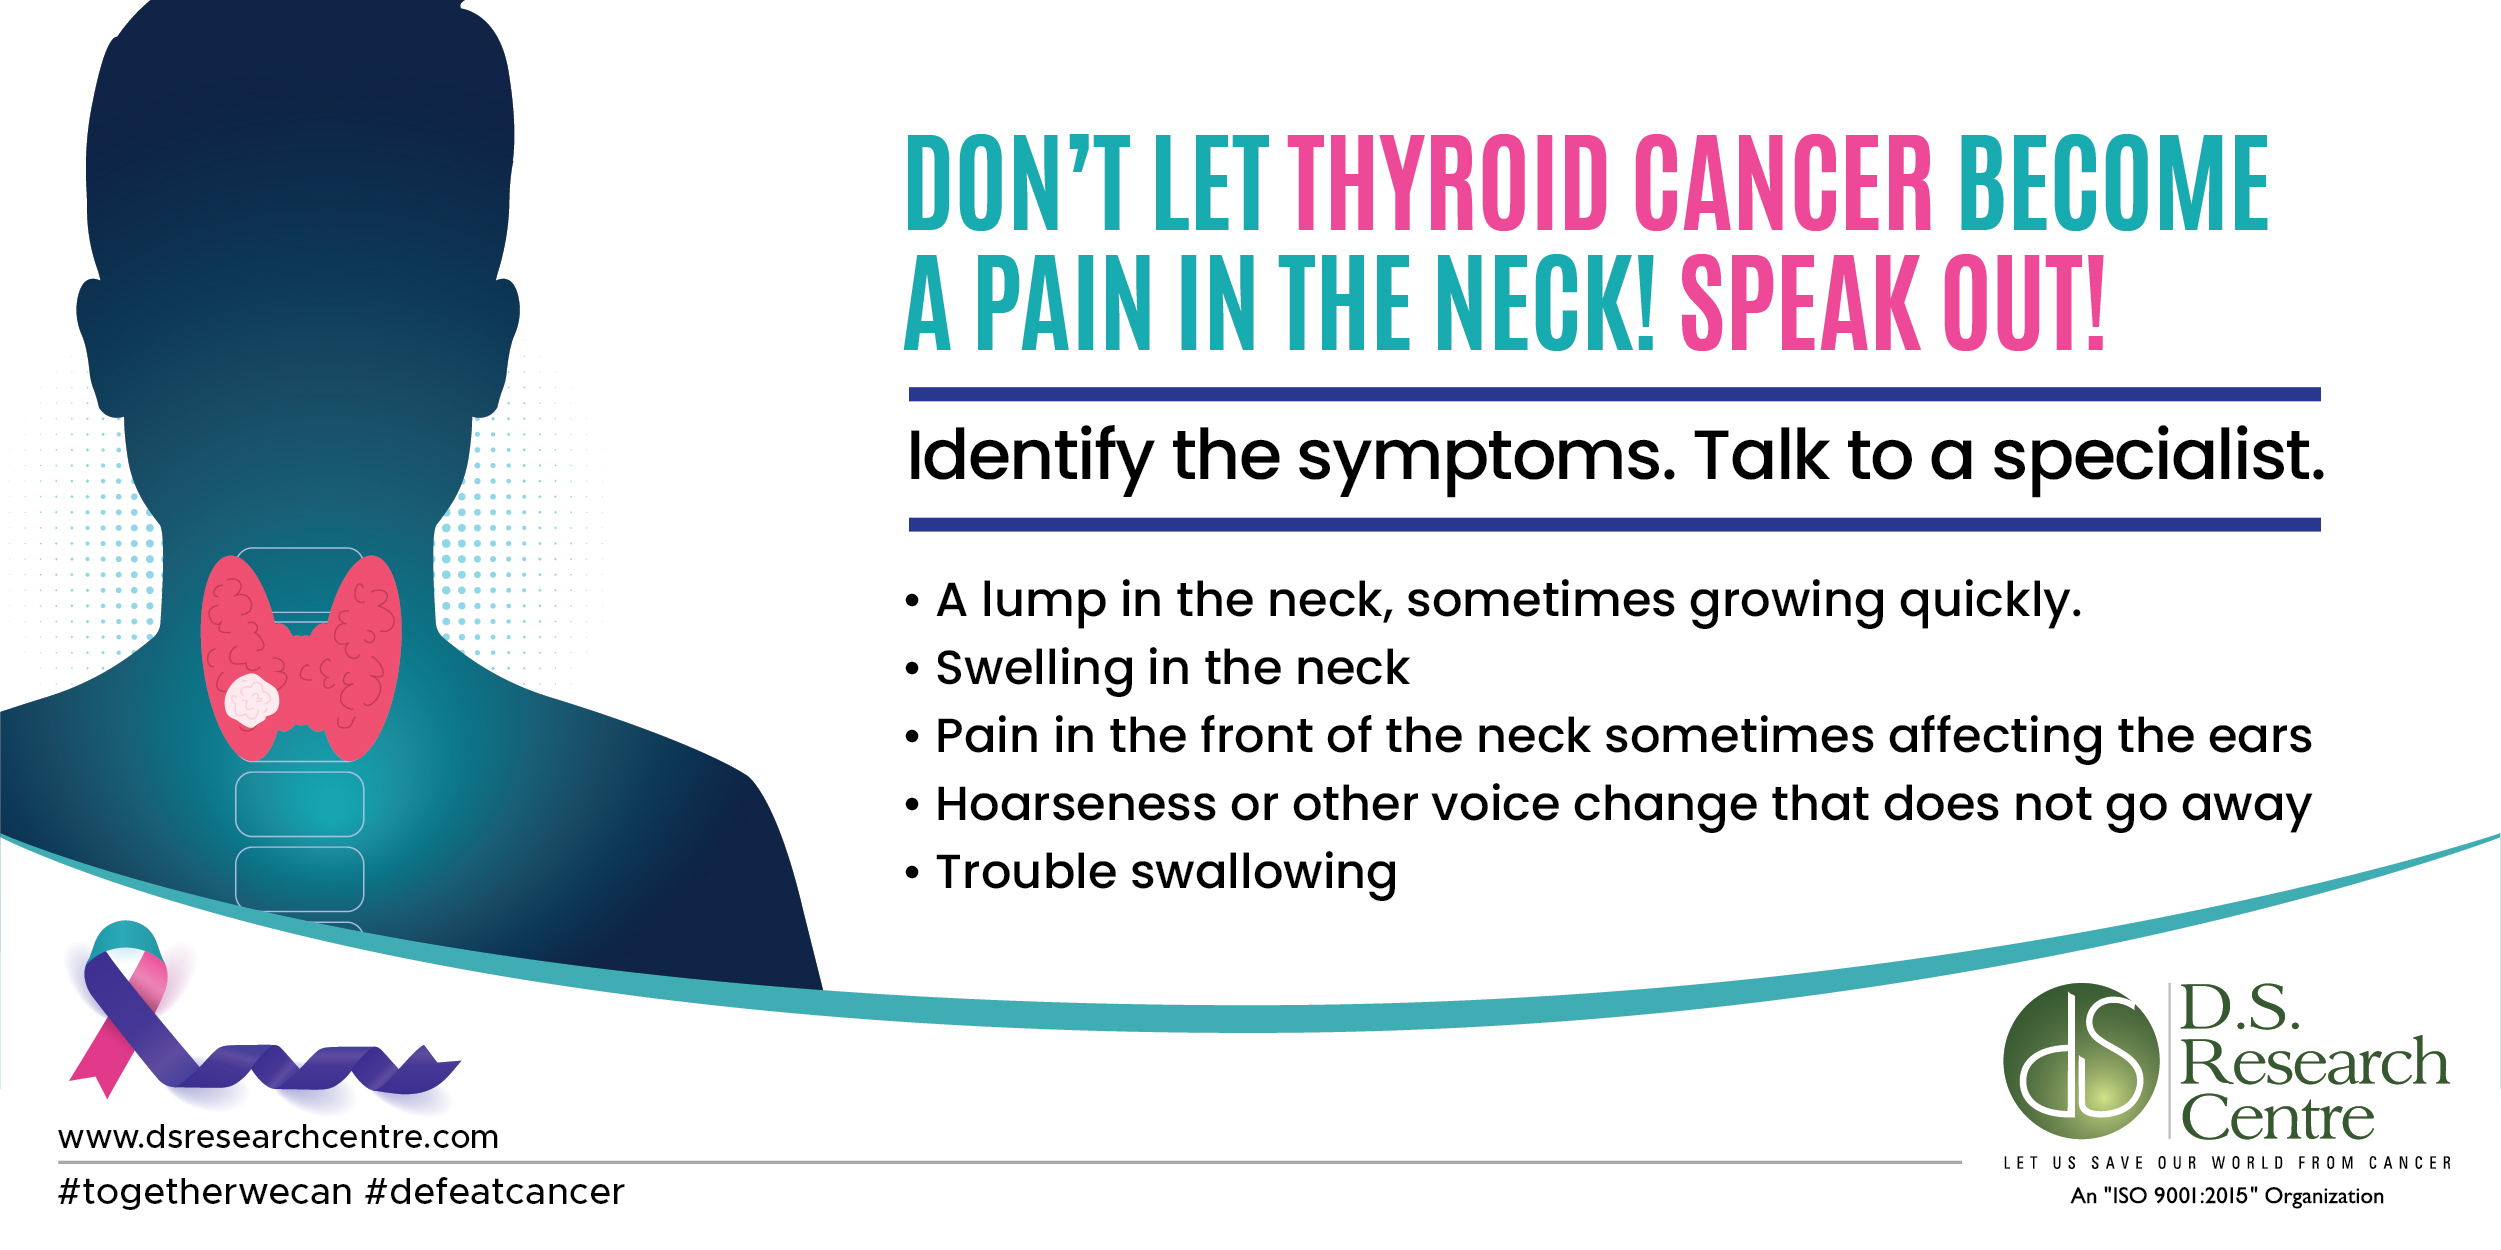 THYROID CANCER AND ITS TREATMENT